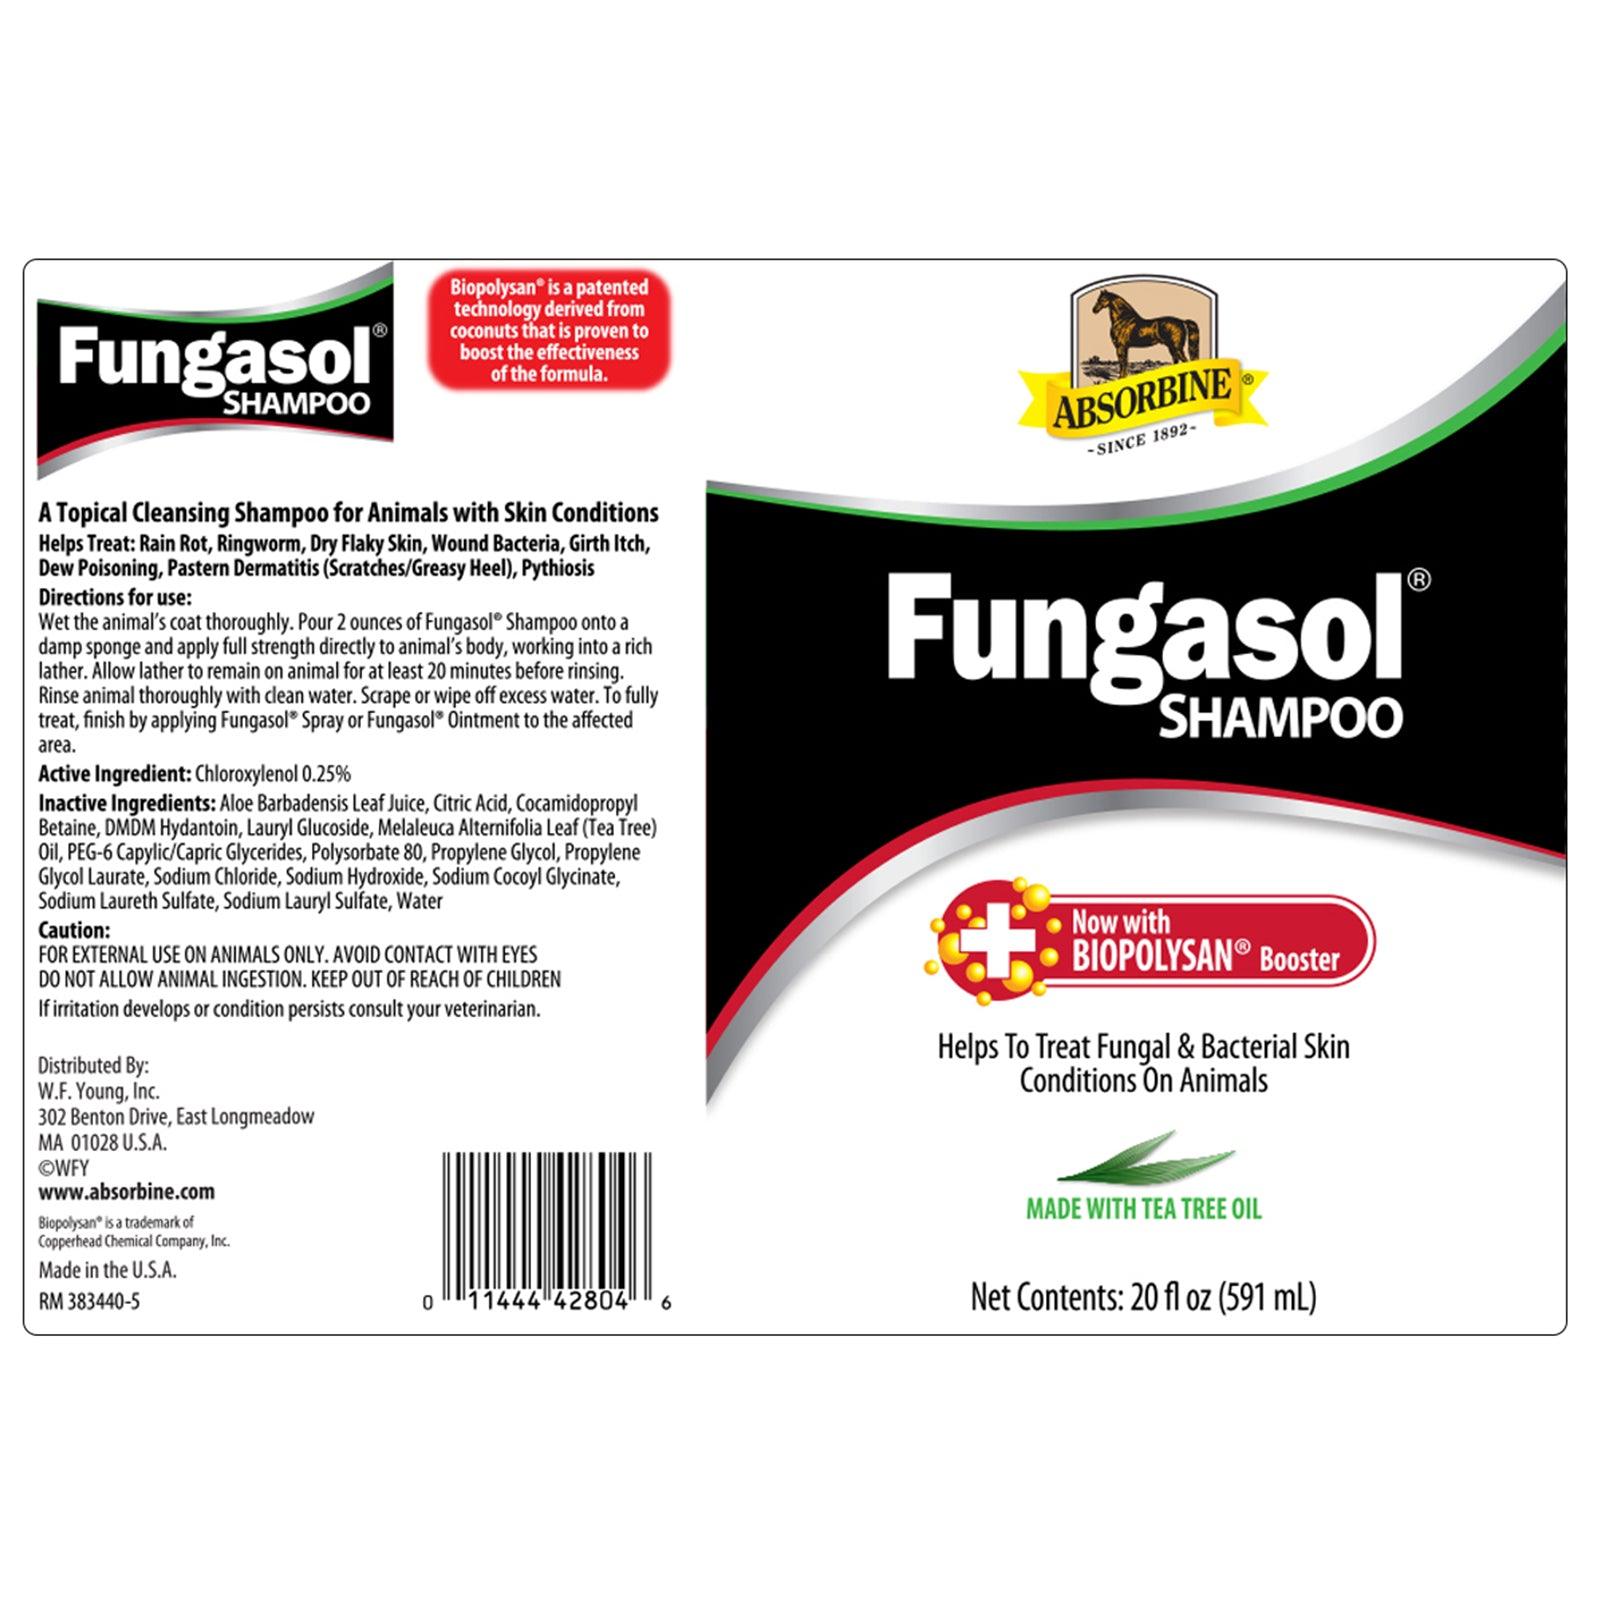 Absorbine Fungasol shampoo wrap around bottle label.  Helps treat fungal and bacterial skin conditions on animals.  Made with tea tree oil.